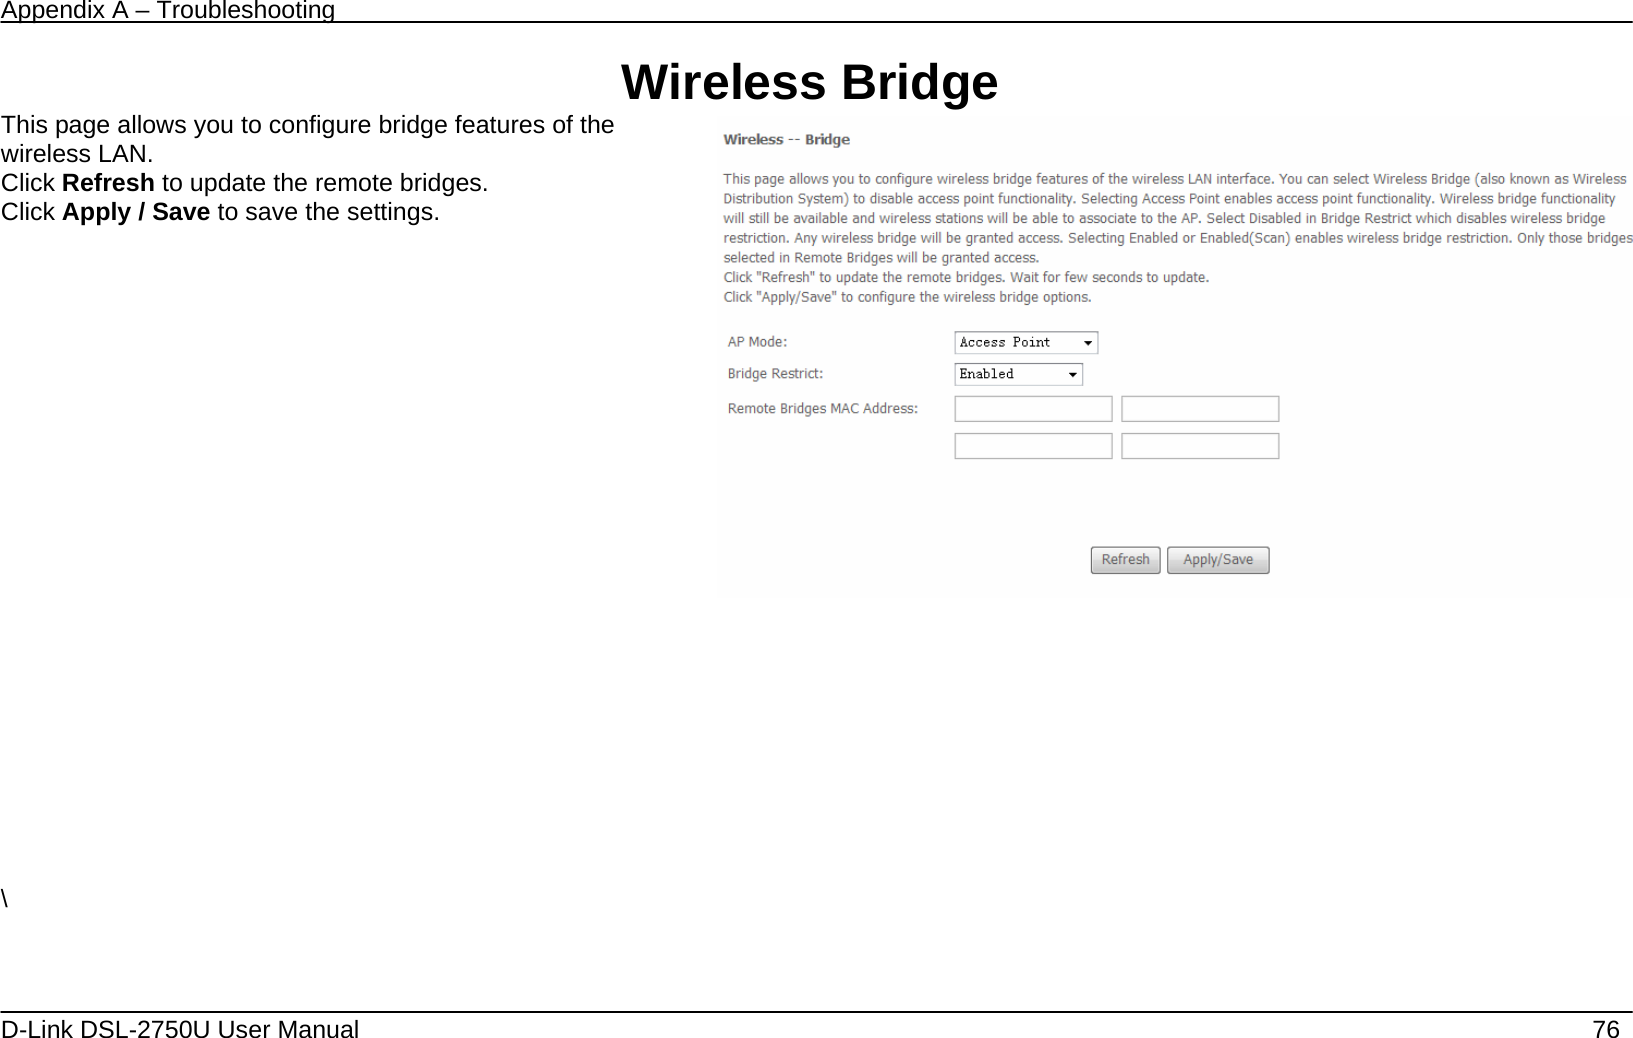 Appendix A – Troubleshooting   D-Link DSL-2750U User Manual    76 Wireless Bridge This page allows you to configure bridge features of the wireless LAN. Click Refresh to update the remote bridges. Click Apply / Save to save the settings.             \   